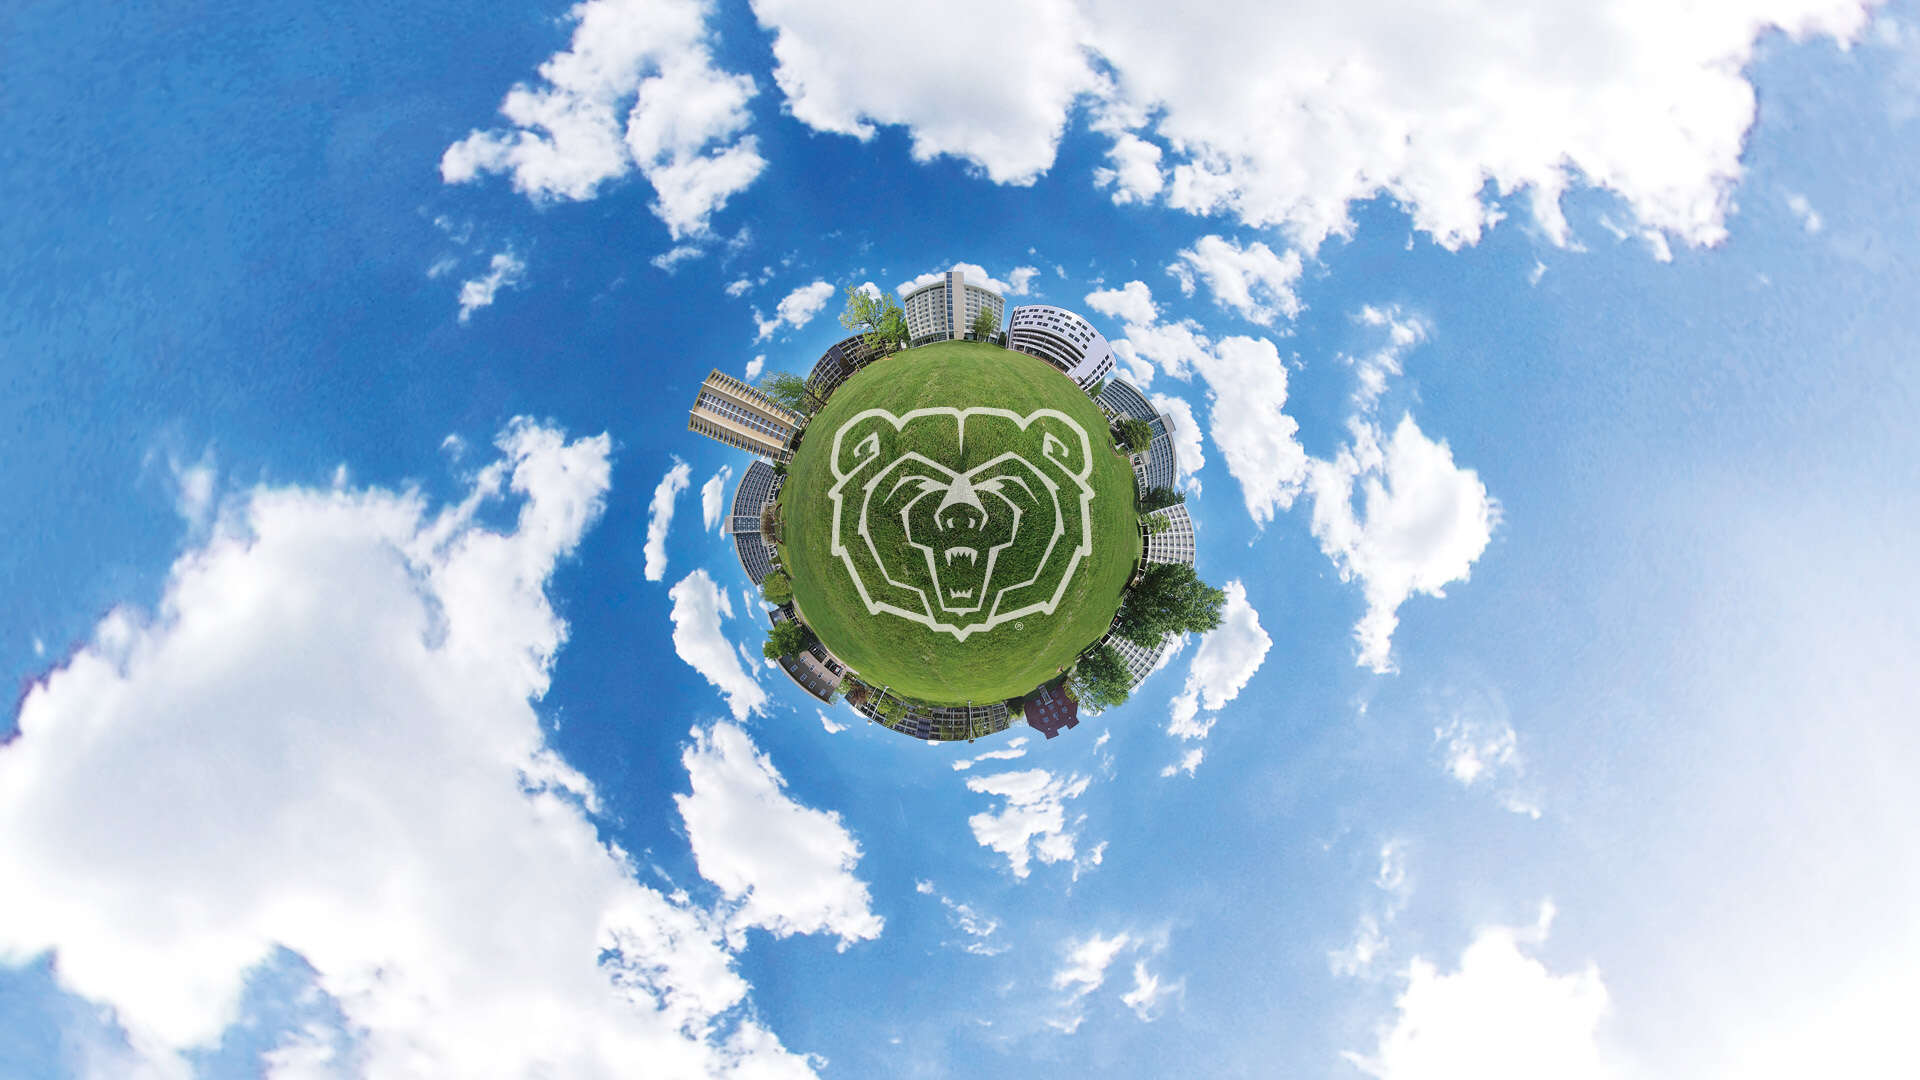 Photo collage of residence halls surrounding a tiny grass planet floating in a blue sky with clouds